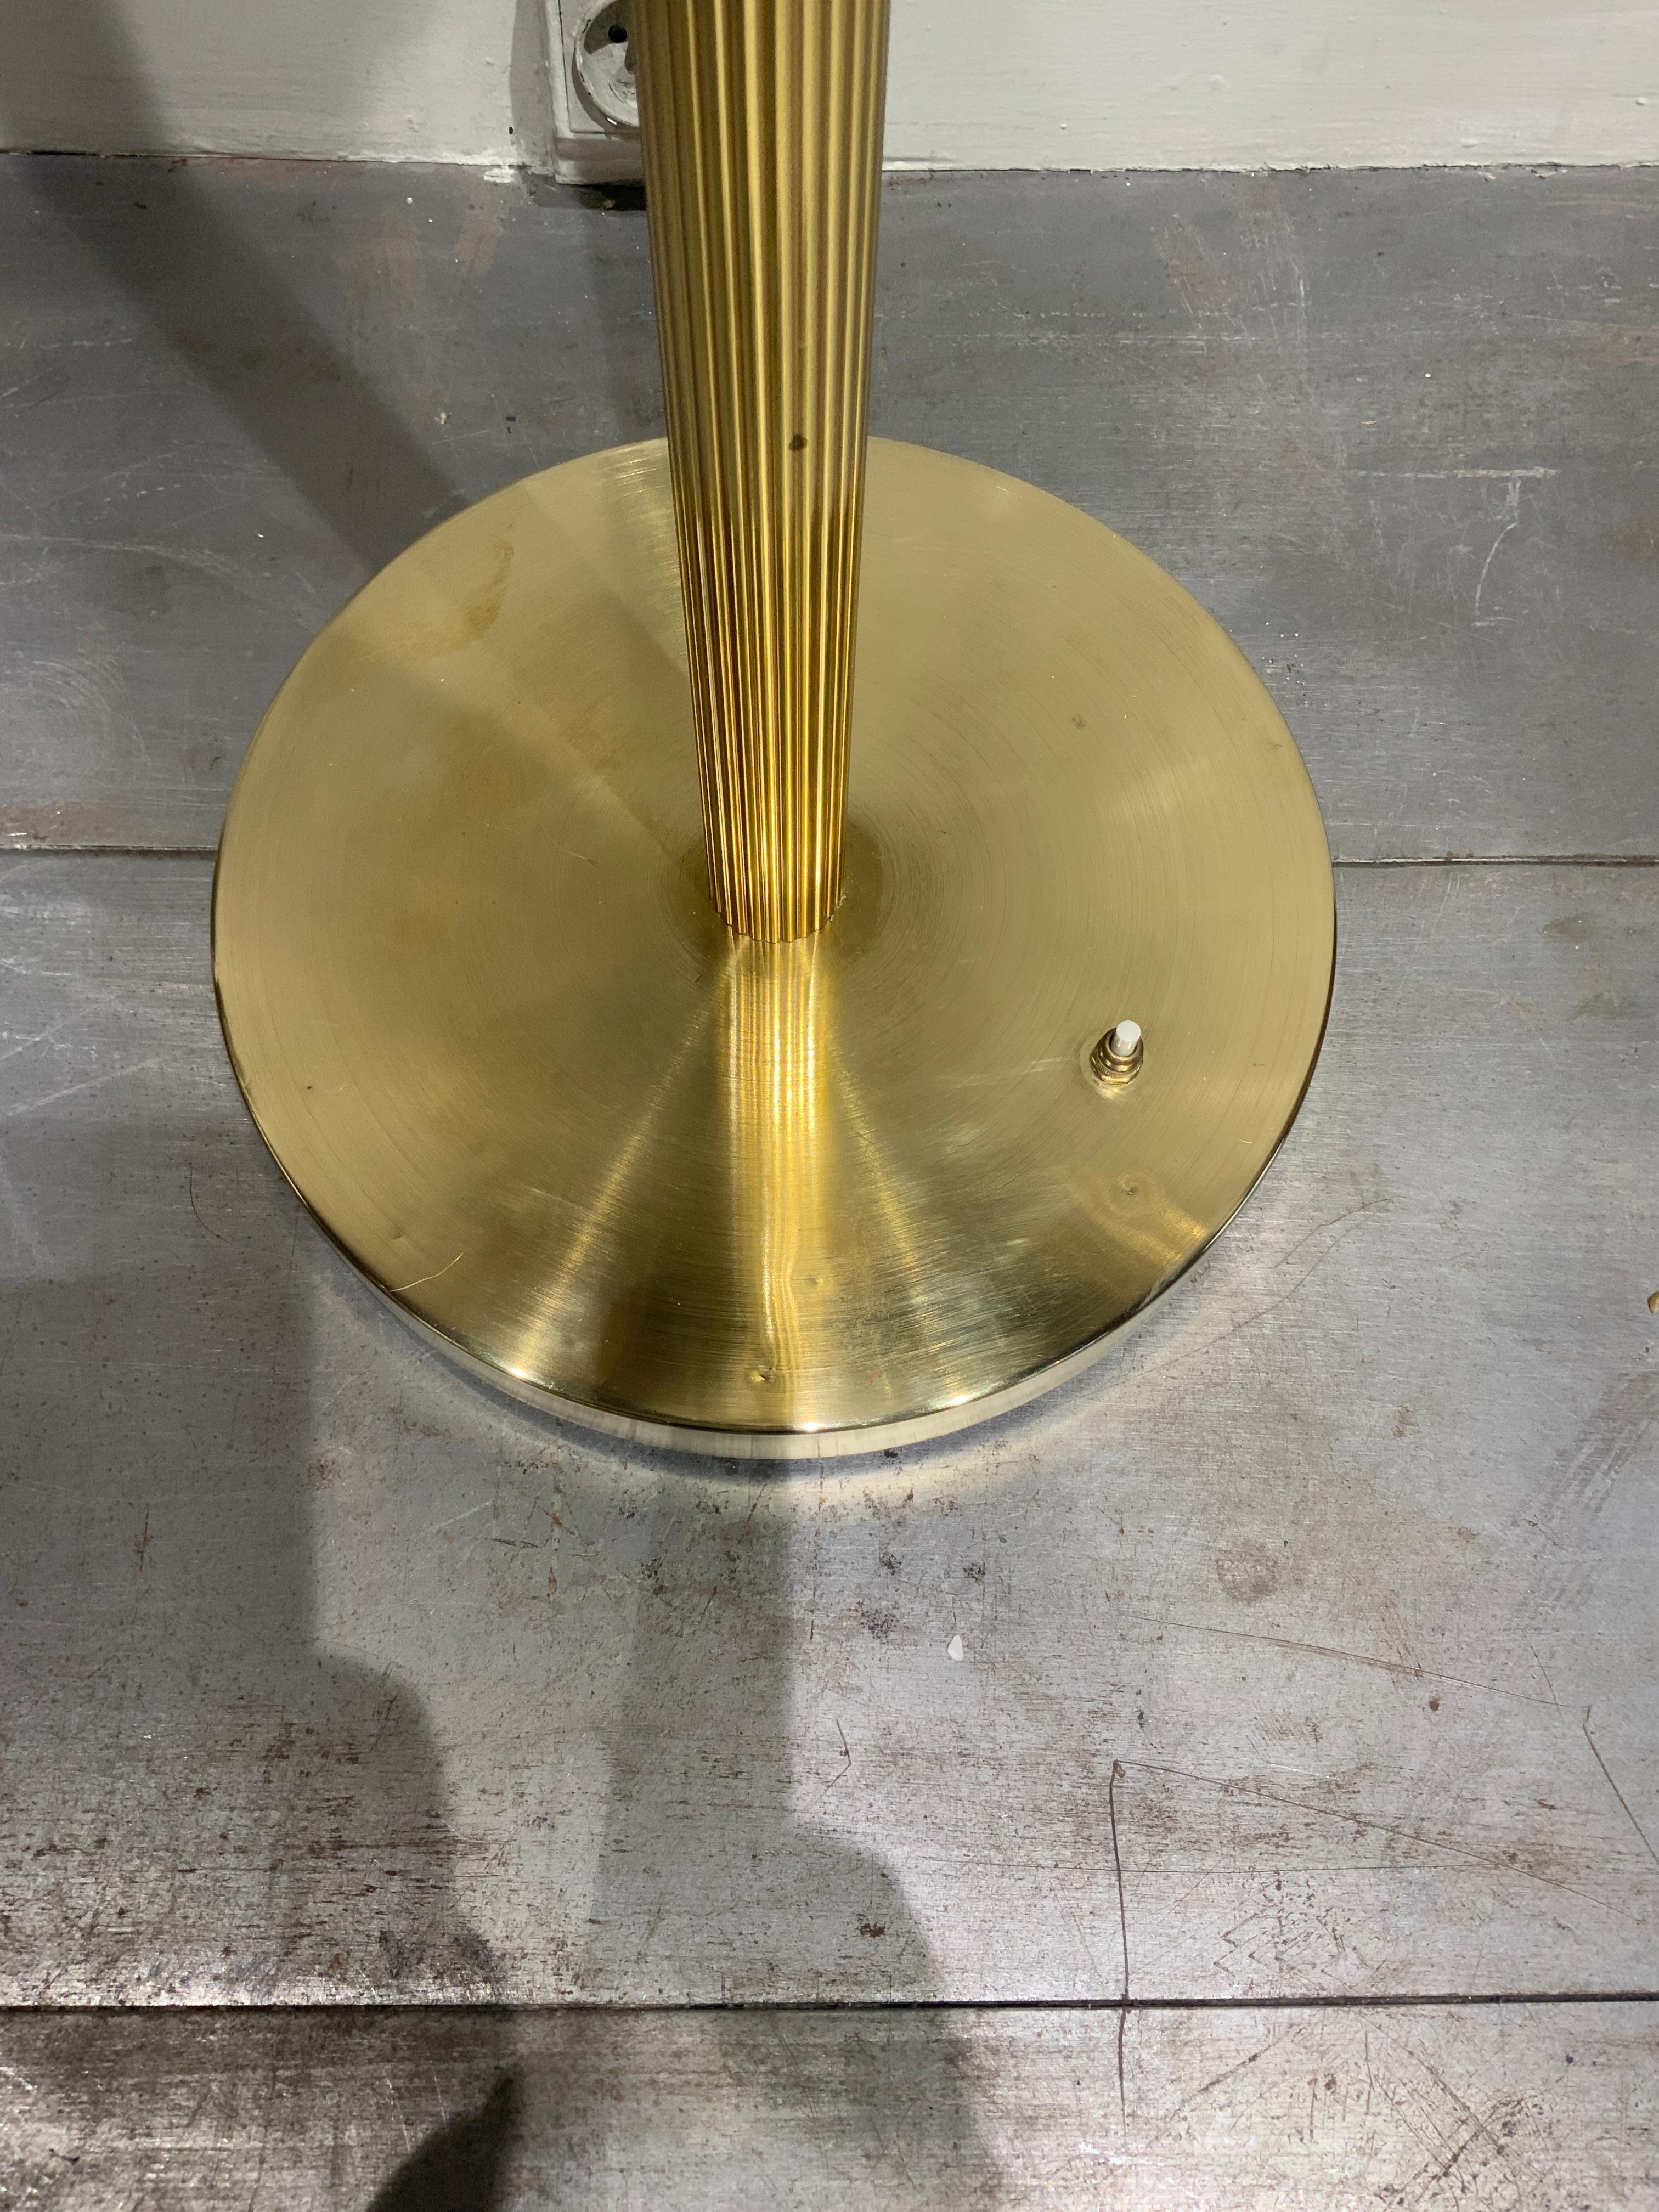 Rare floor lamp by glossner Sweden marked and dated 1947 on the glass cup 
Brass base 